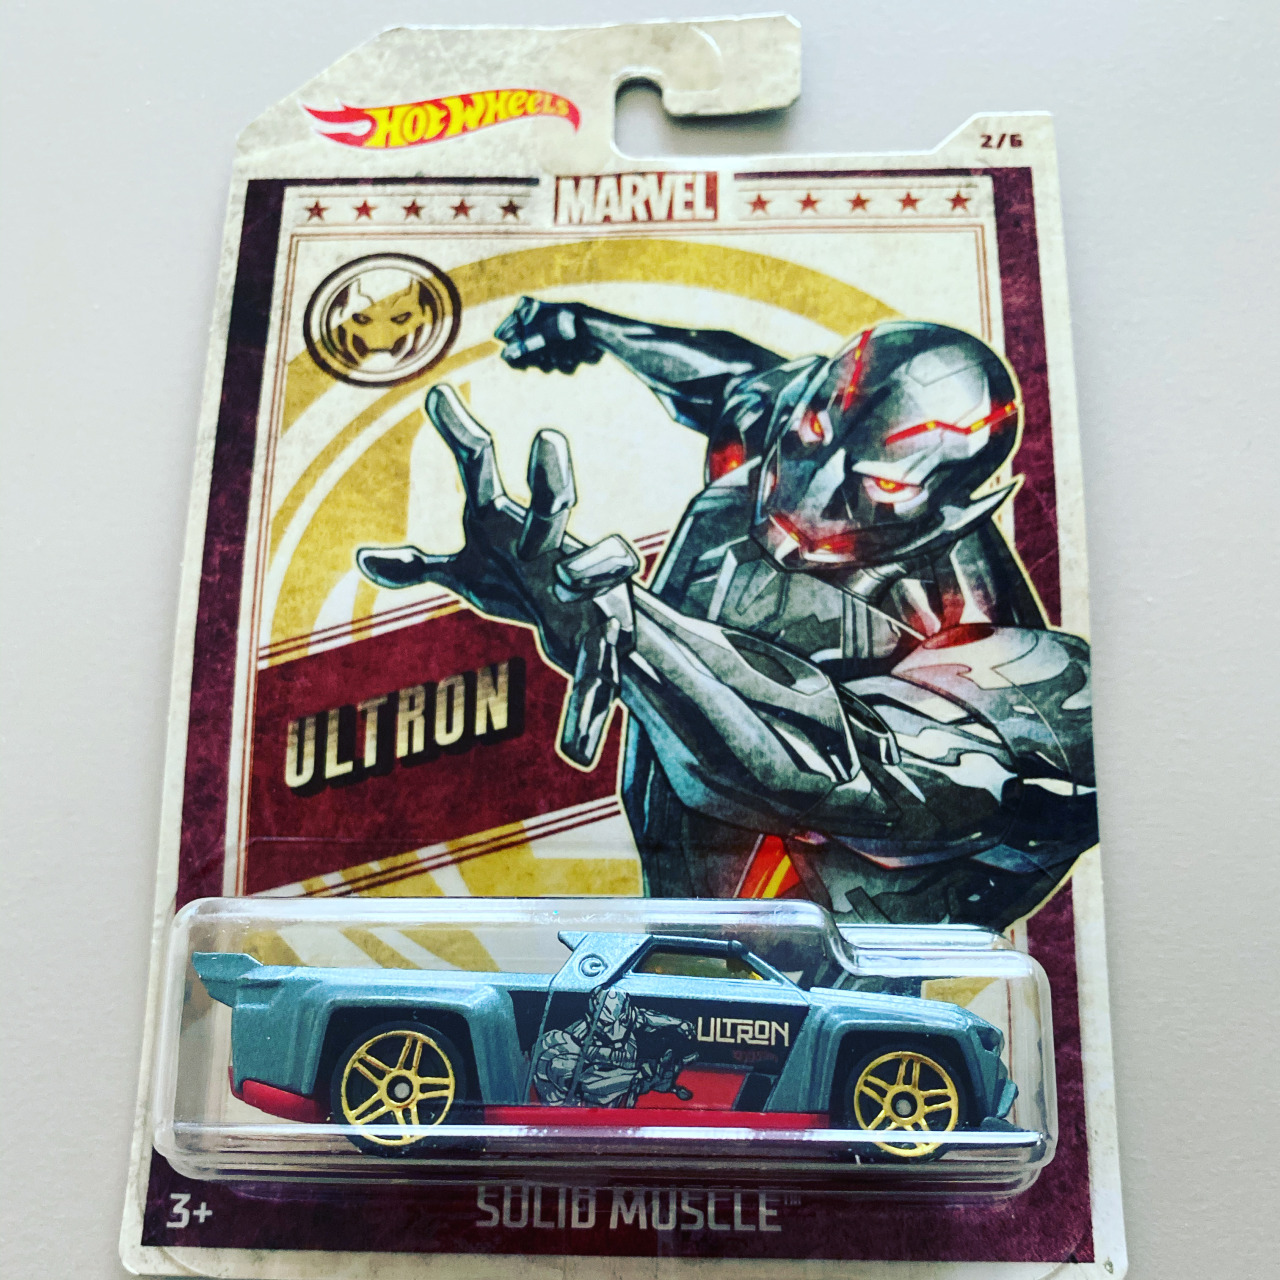 Hot Wheels Marvel Avengers Series Auto Car FYY63 2/6 Solip Muscle Ultron 